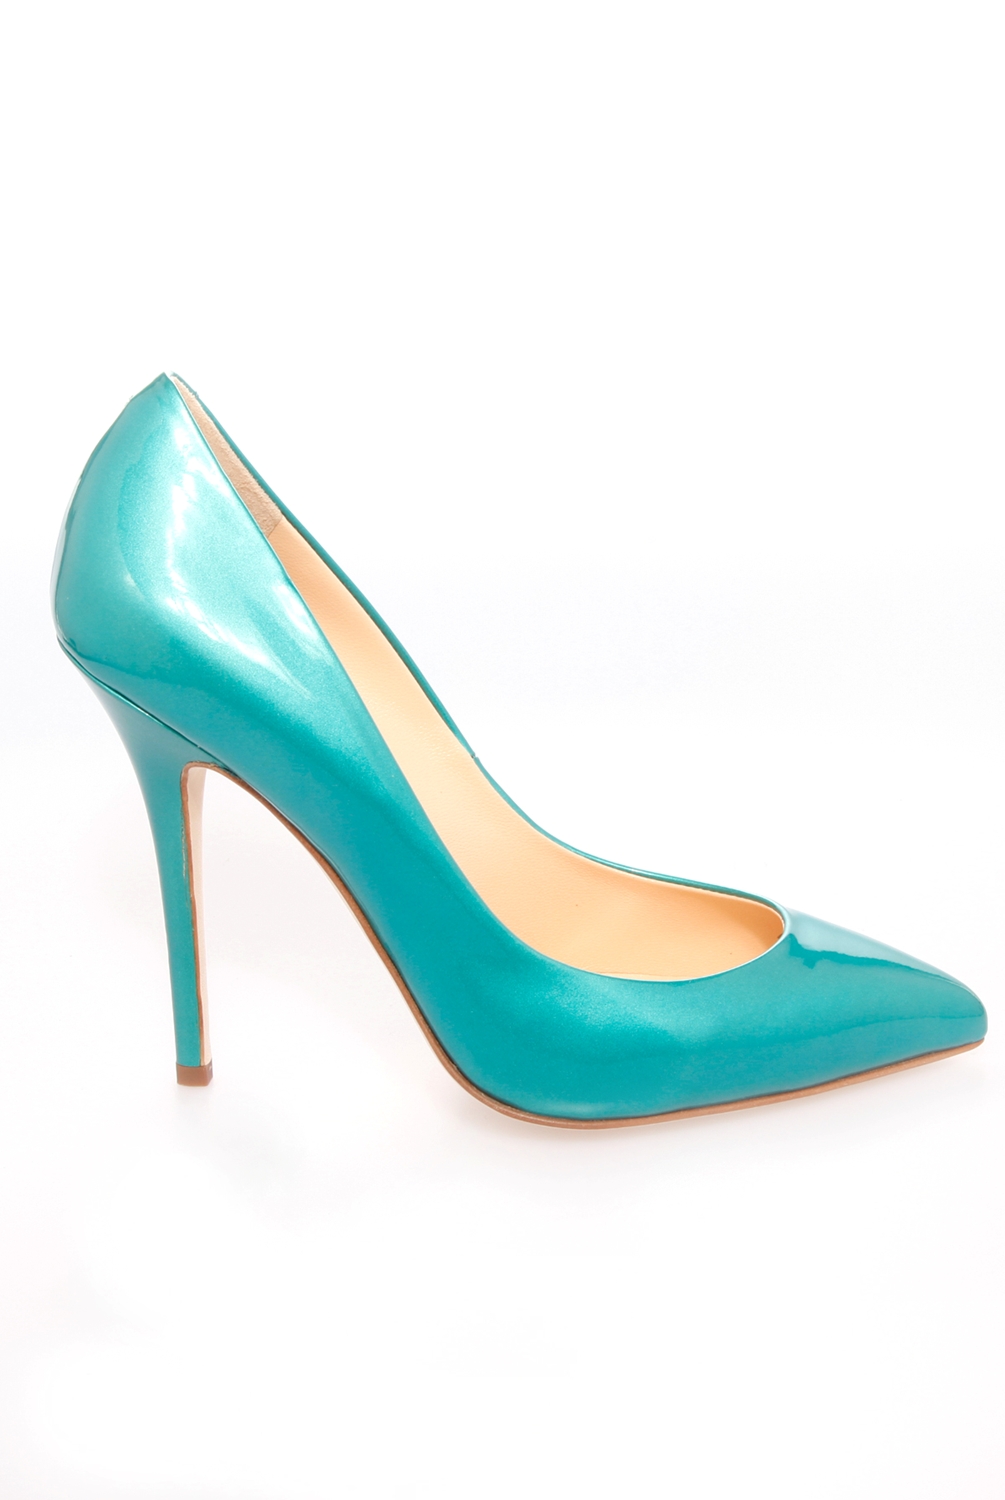 Giuseppe Zanotti Turquoise Pointed Heel Pumps in Blue - Lyst